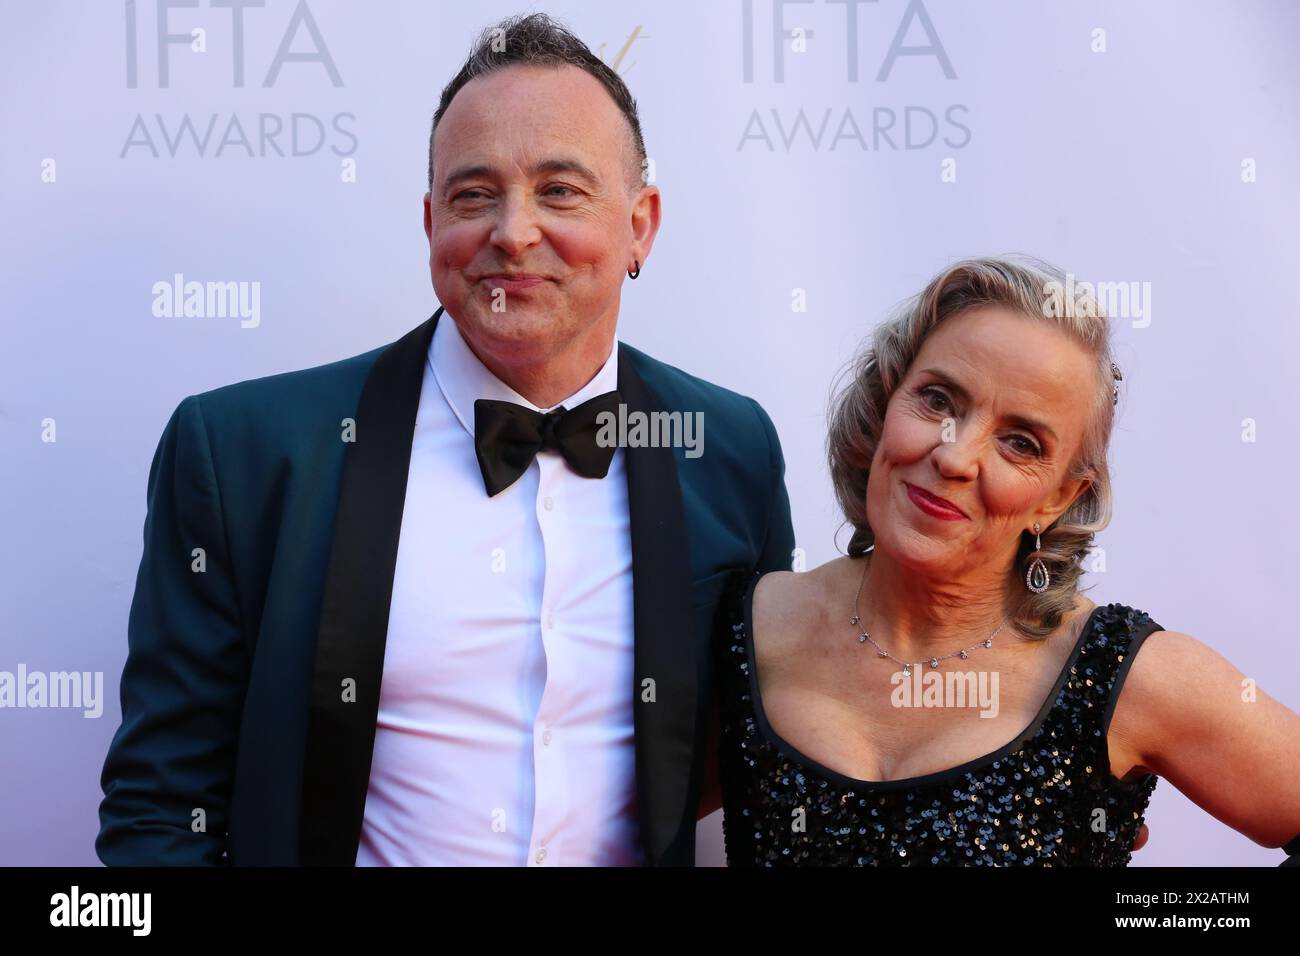 Dublin, Ireland. 20th April 2024.  Ferdia Murphy and Lara Campbell arriving on the red carpet at the Irish Film and Television Awards (IFTA), Dublin Royal Convention Centre. Credit: Doreen Kennedy/Alamy Live News. Stock Photo